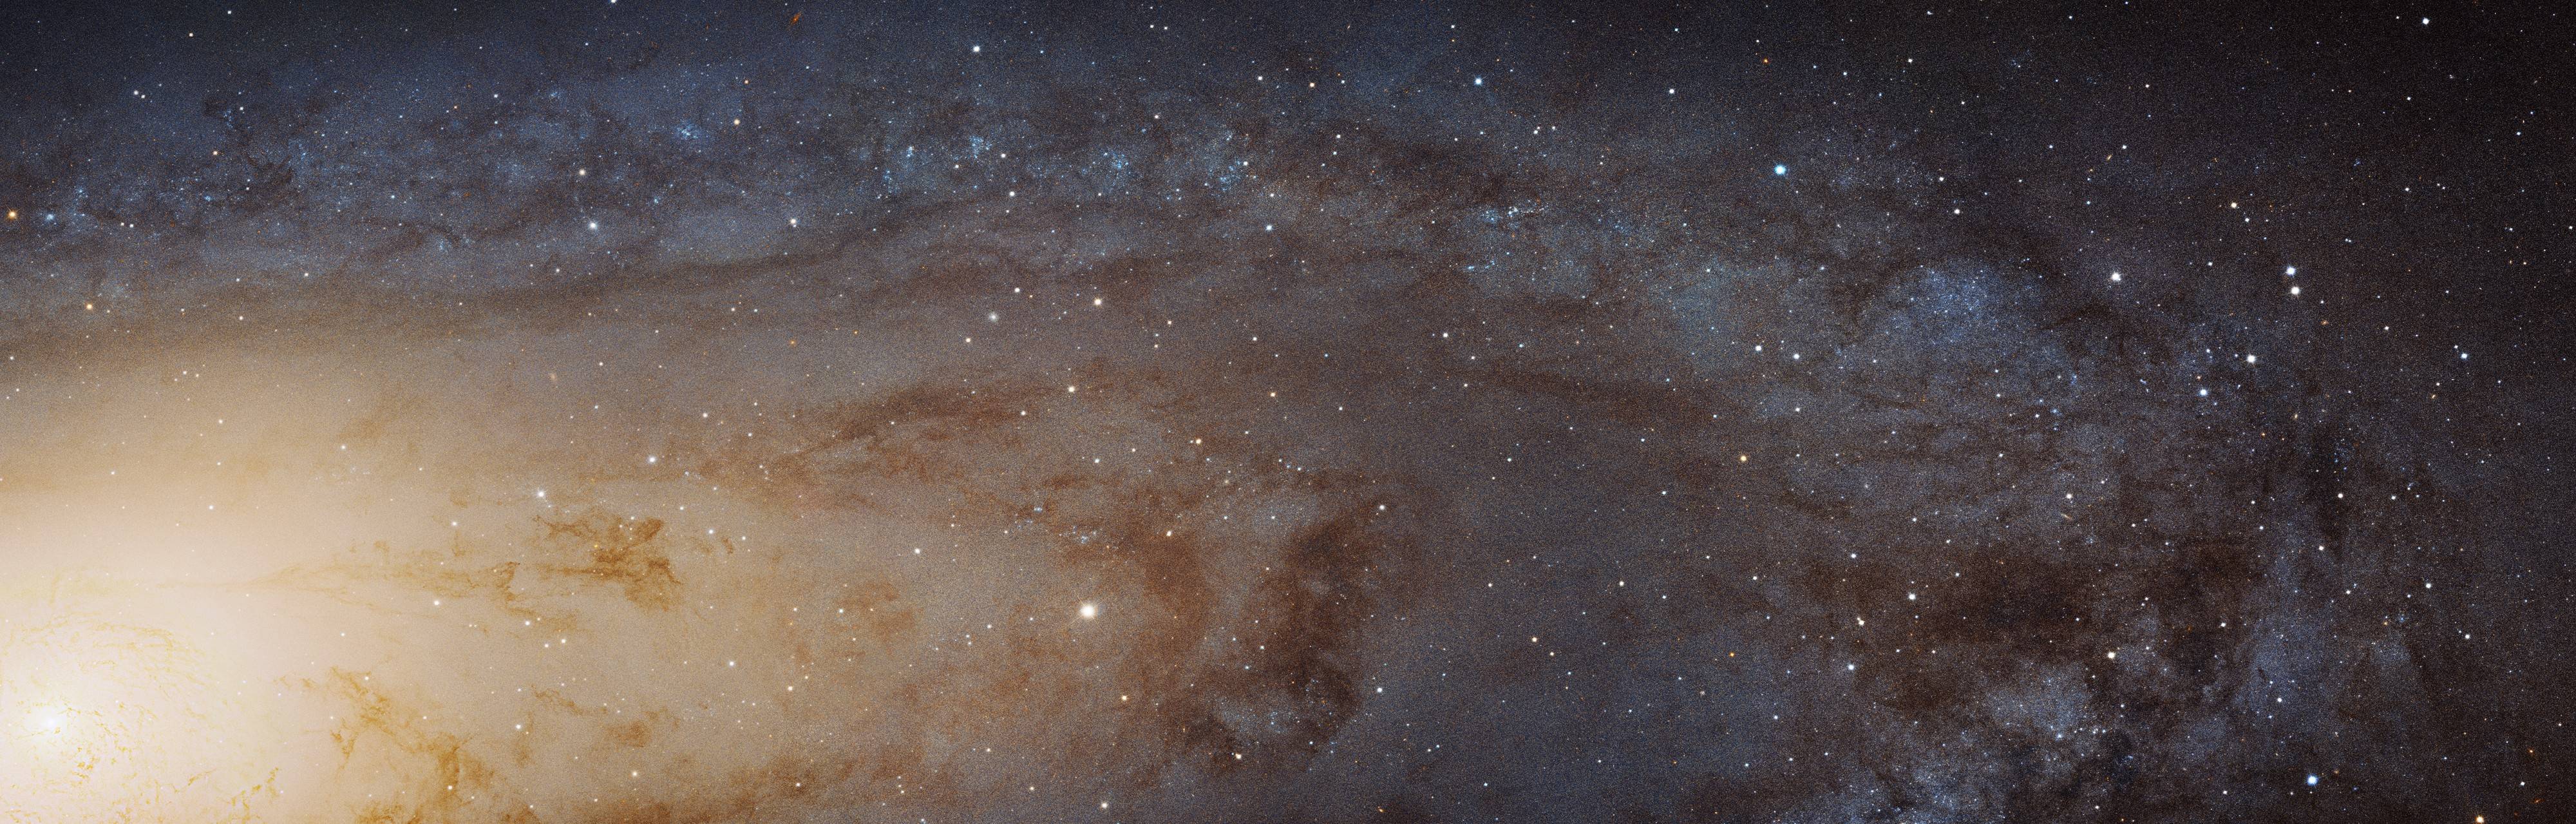 hubble image of the andromeda galaxy released with 1.5 billion pixels